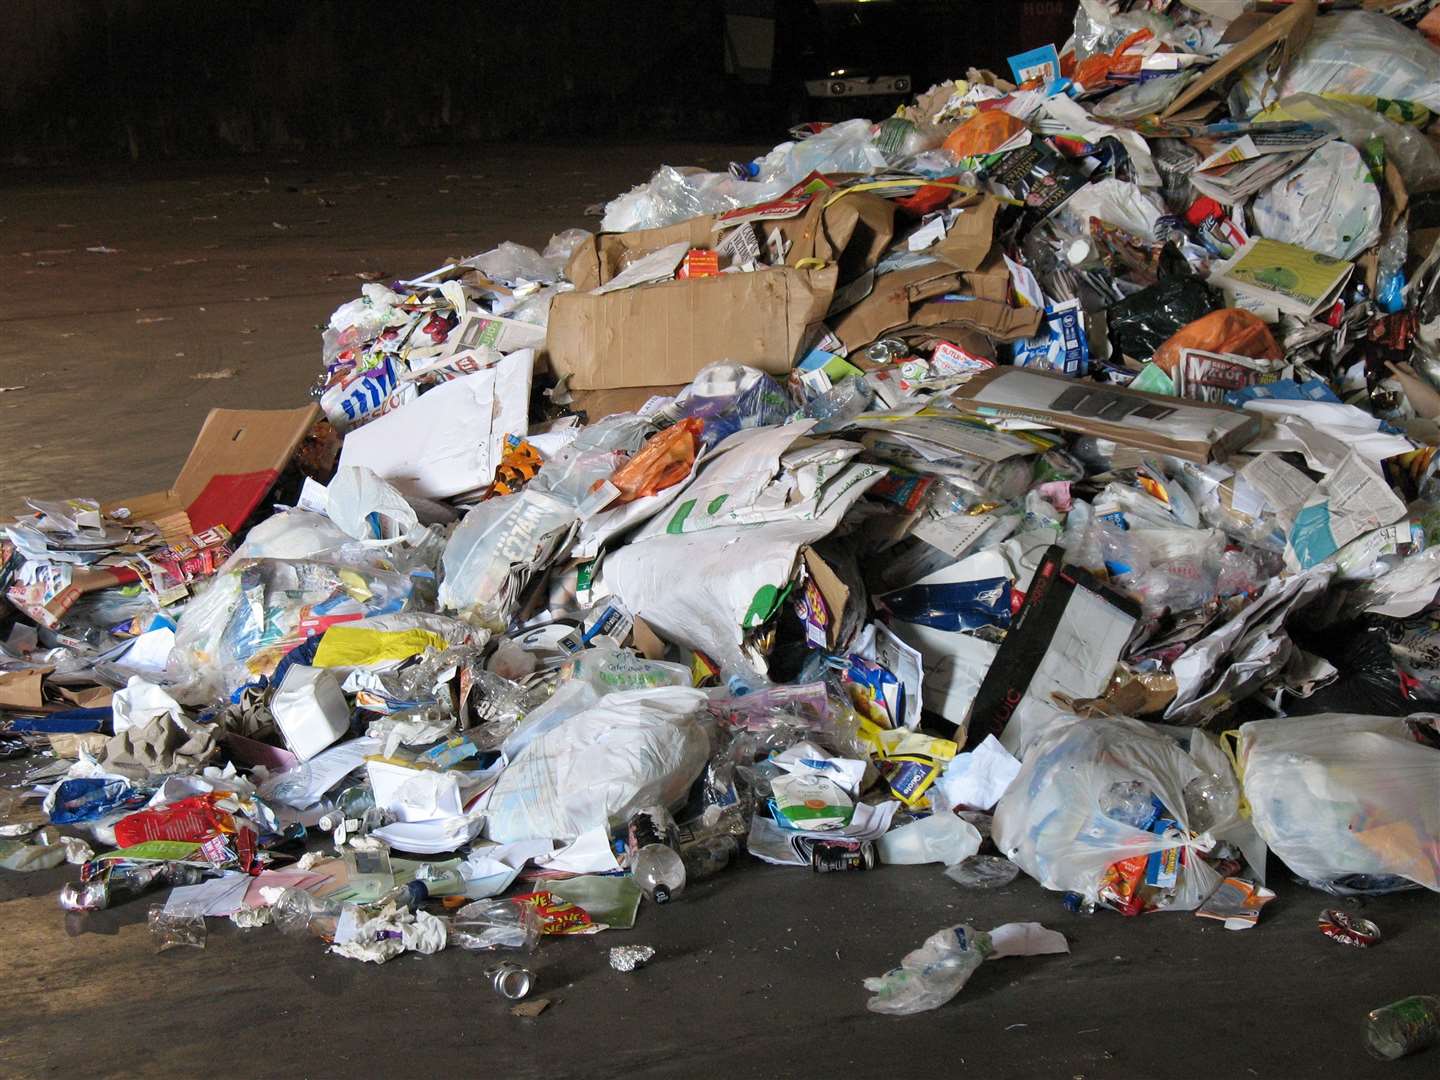 Piles of waste at Allington incinerator near Maidstone